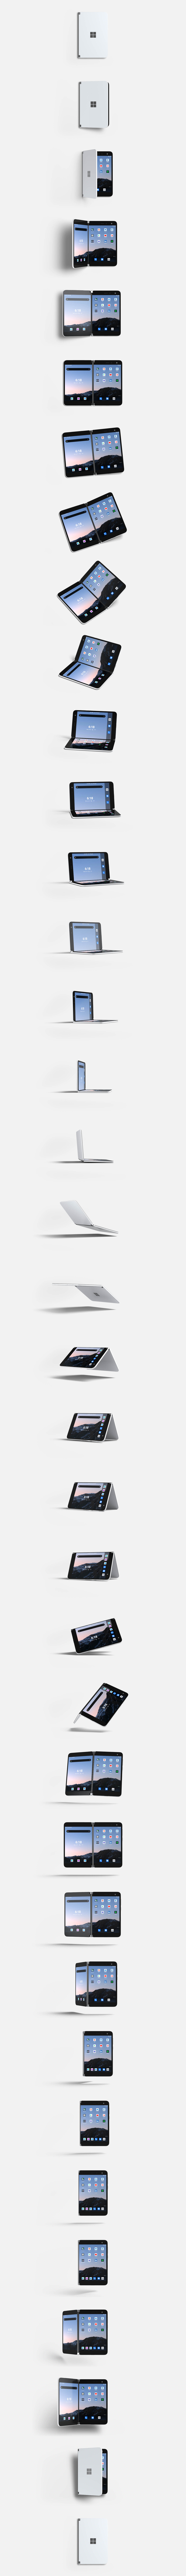 The many modes of Surface Duo